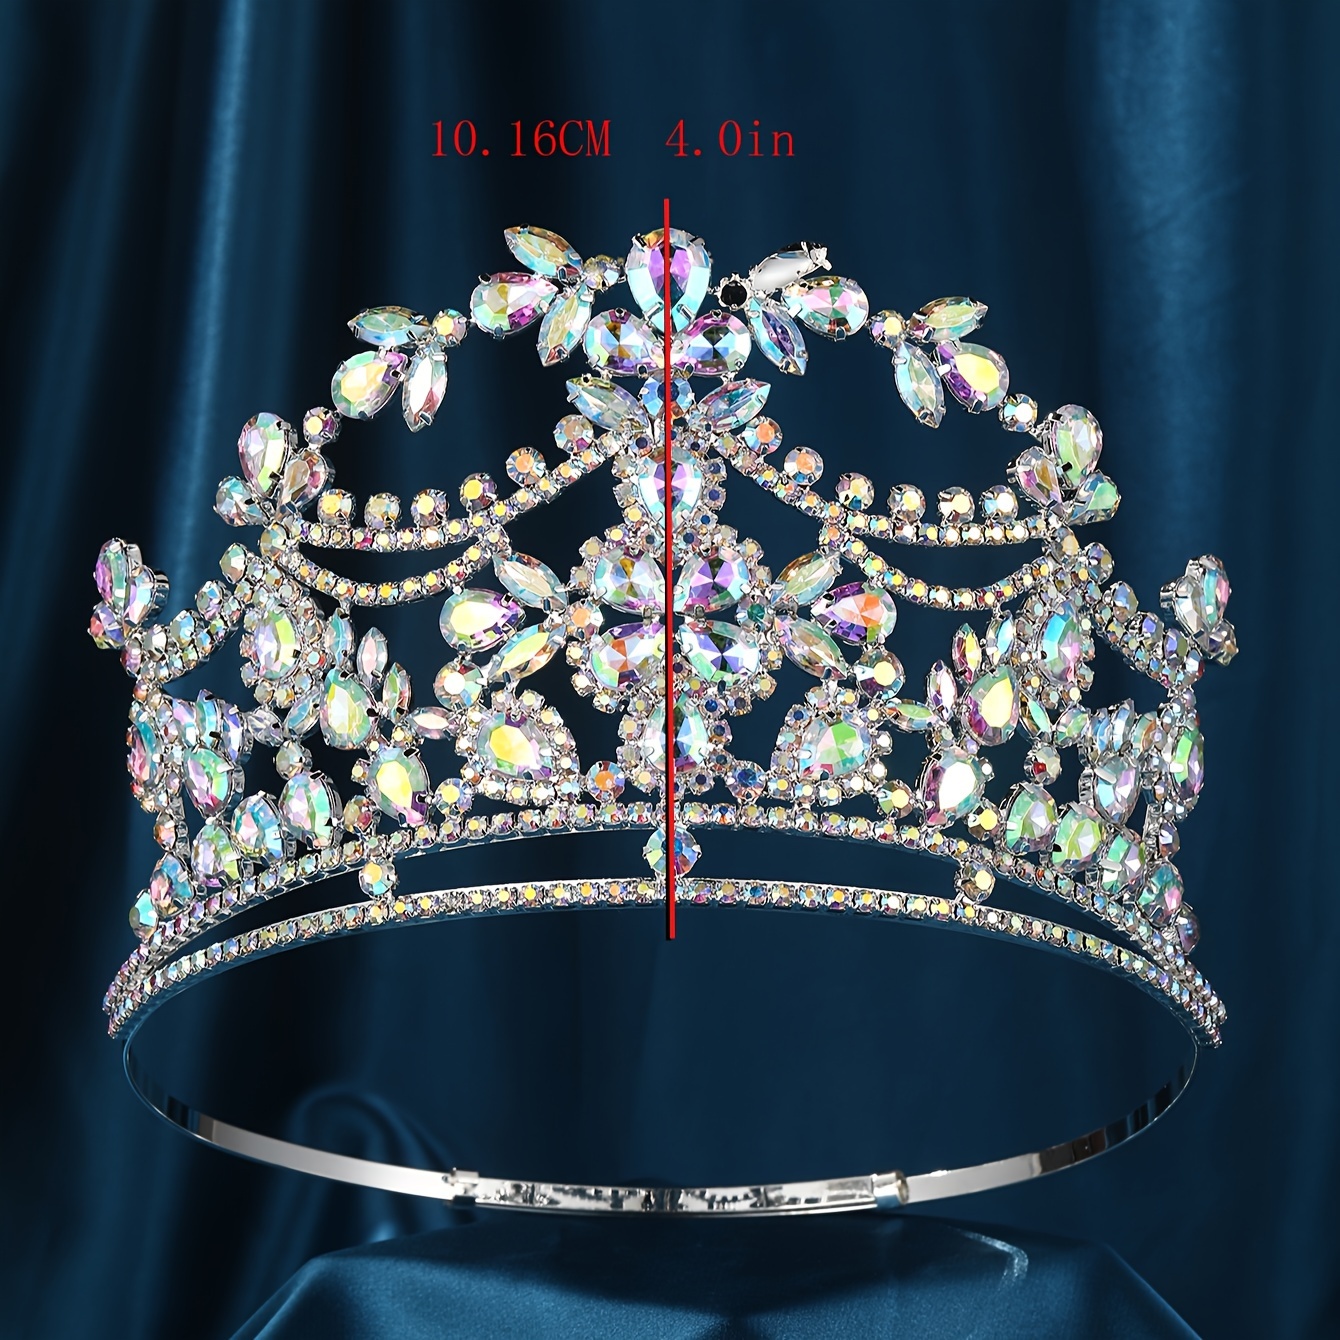 luxury imitation crystal beauty pageant crown miss world style tiara birthday party festival accessory fashion award ceremony large crown bridal headpiece queens regalia for celebrations